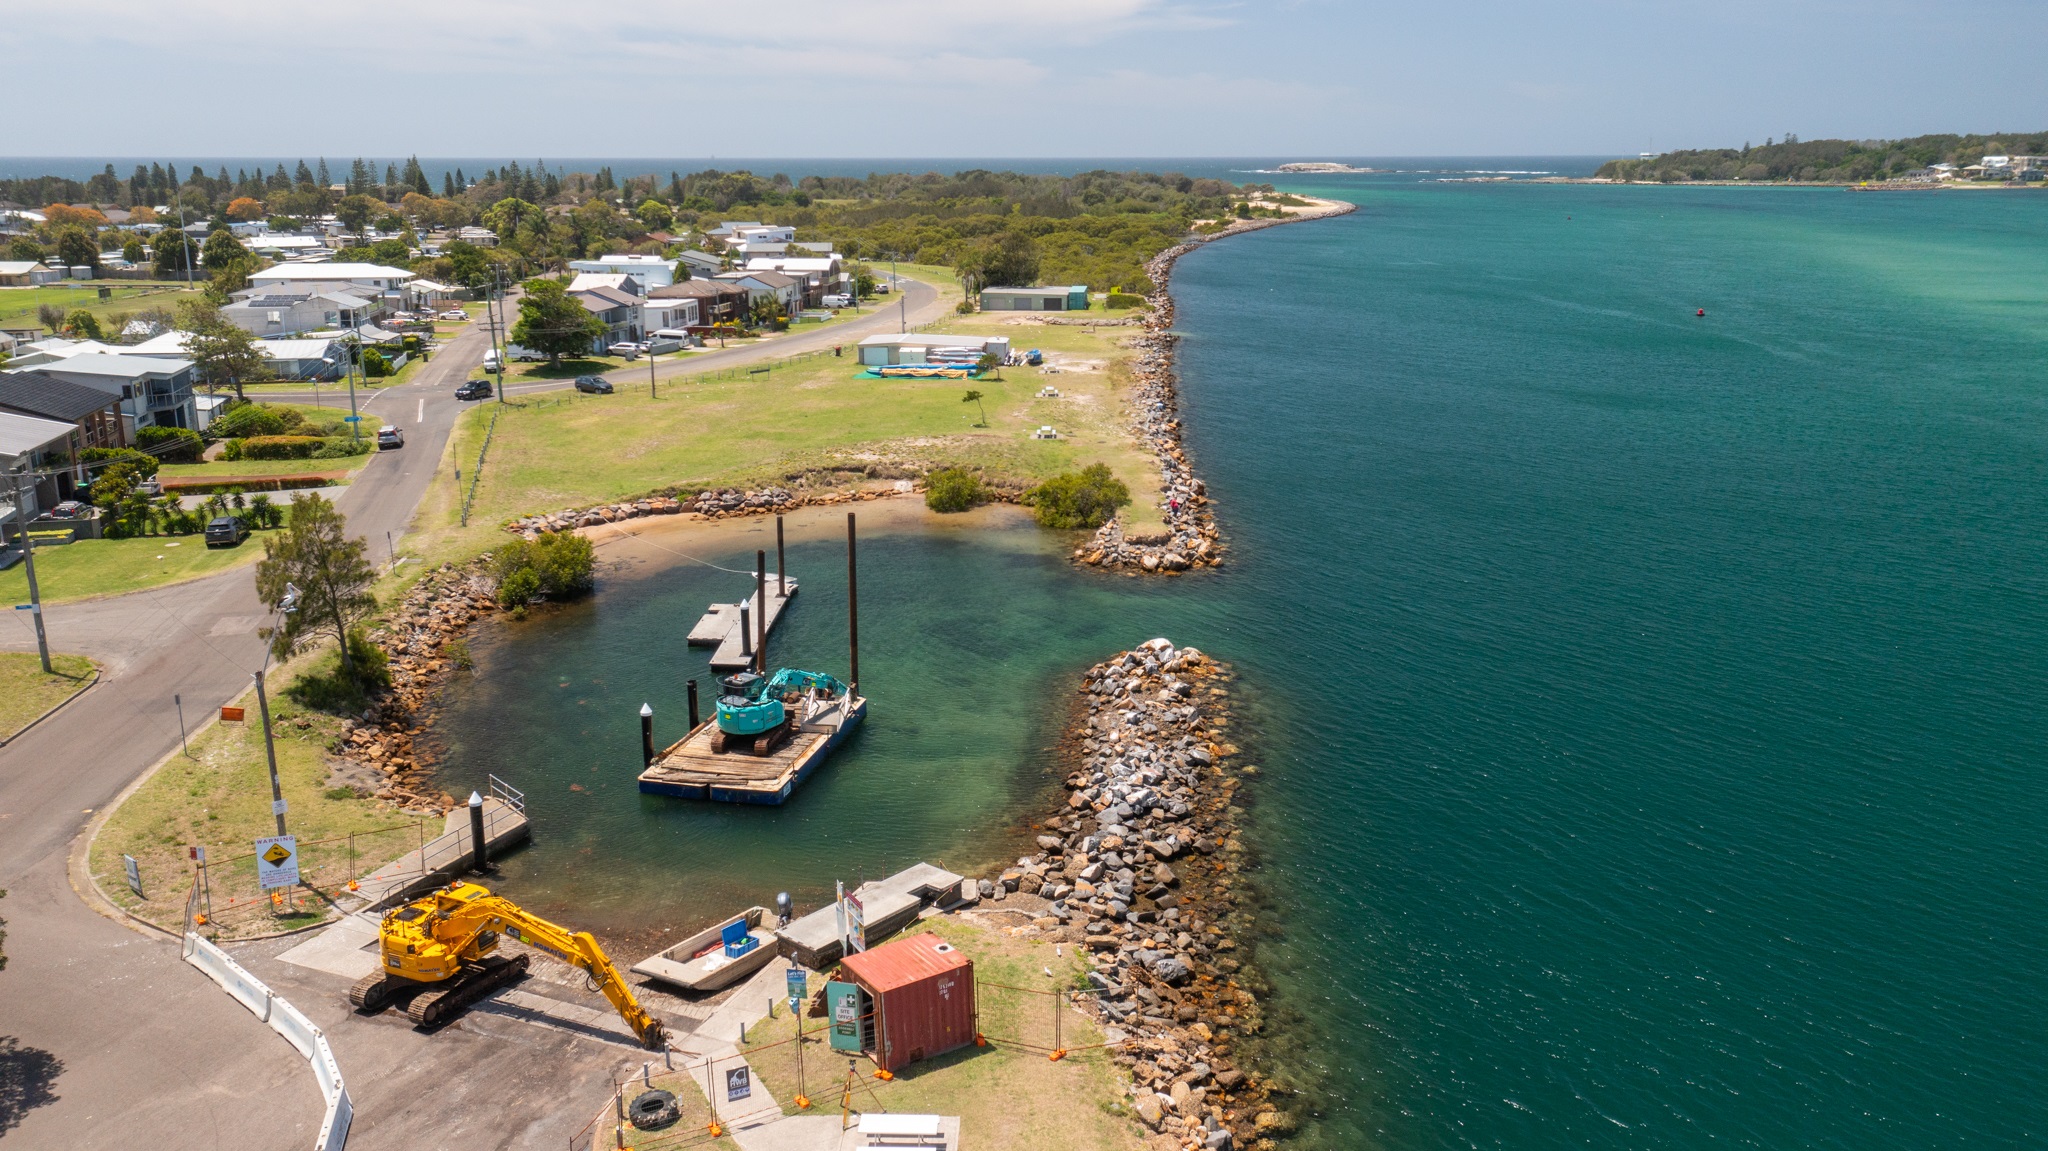 An overhead view of recent works conducted to repair the Blacksmiths Boat Ramp.